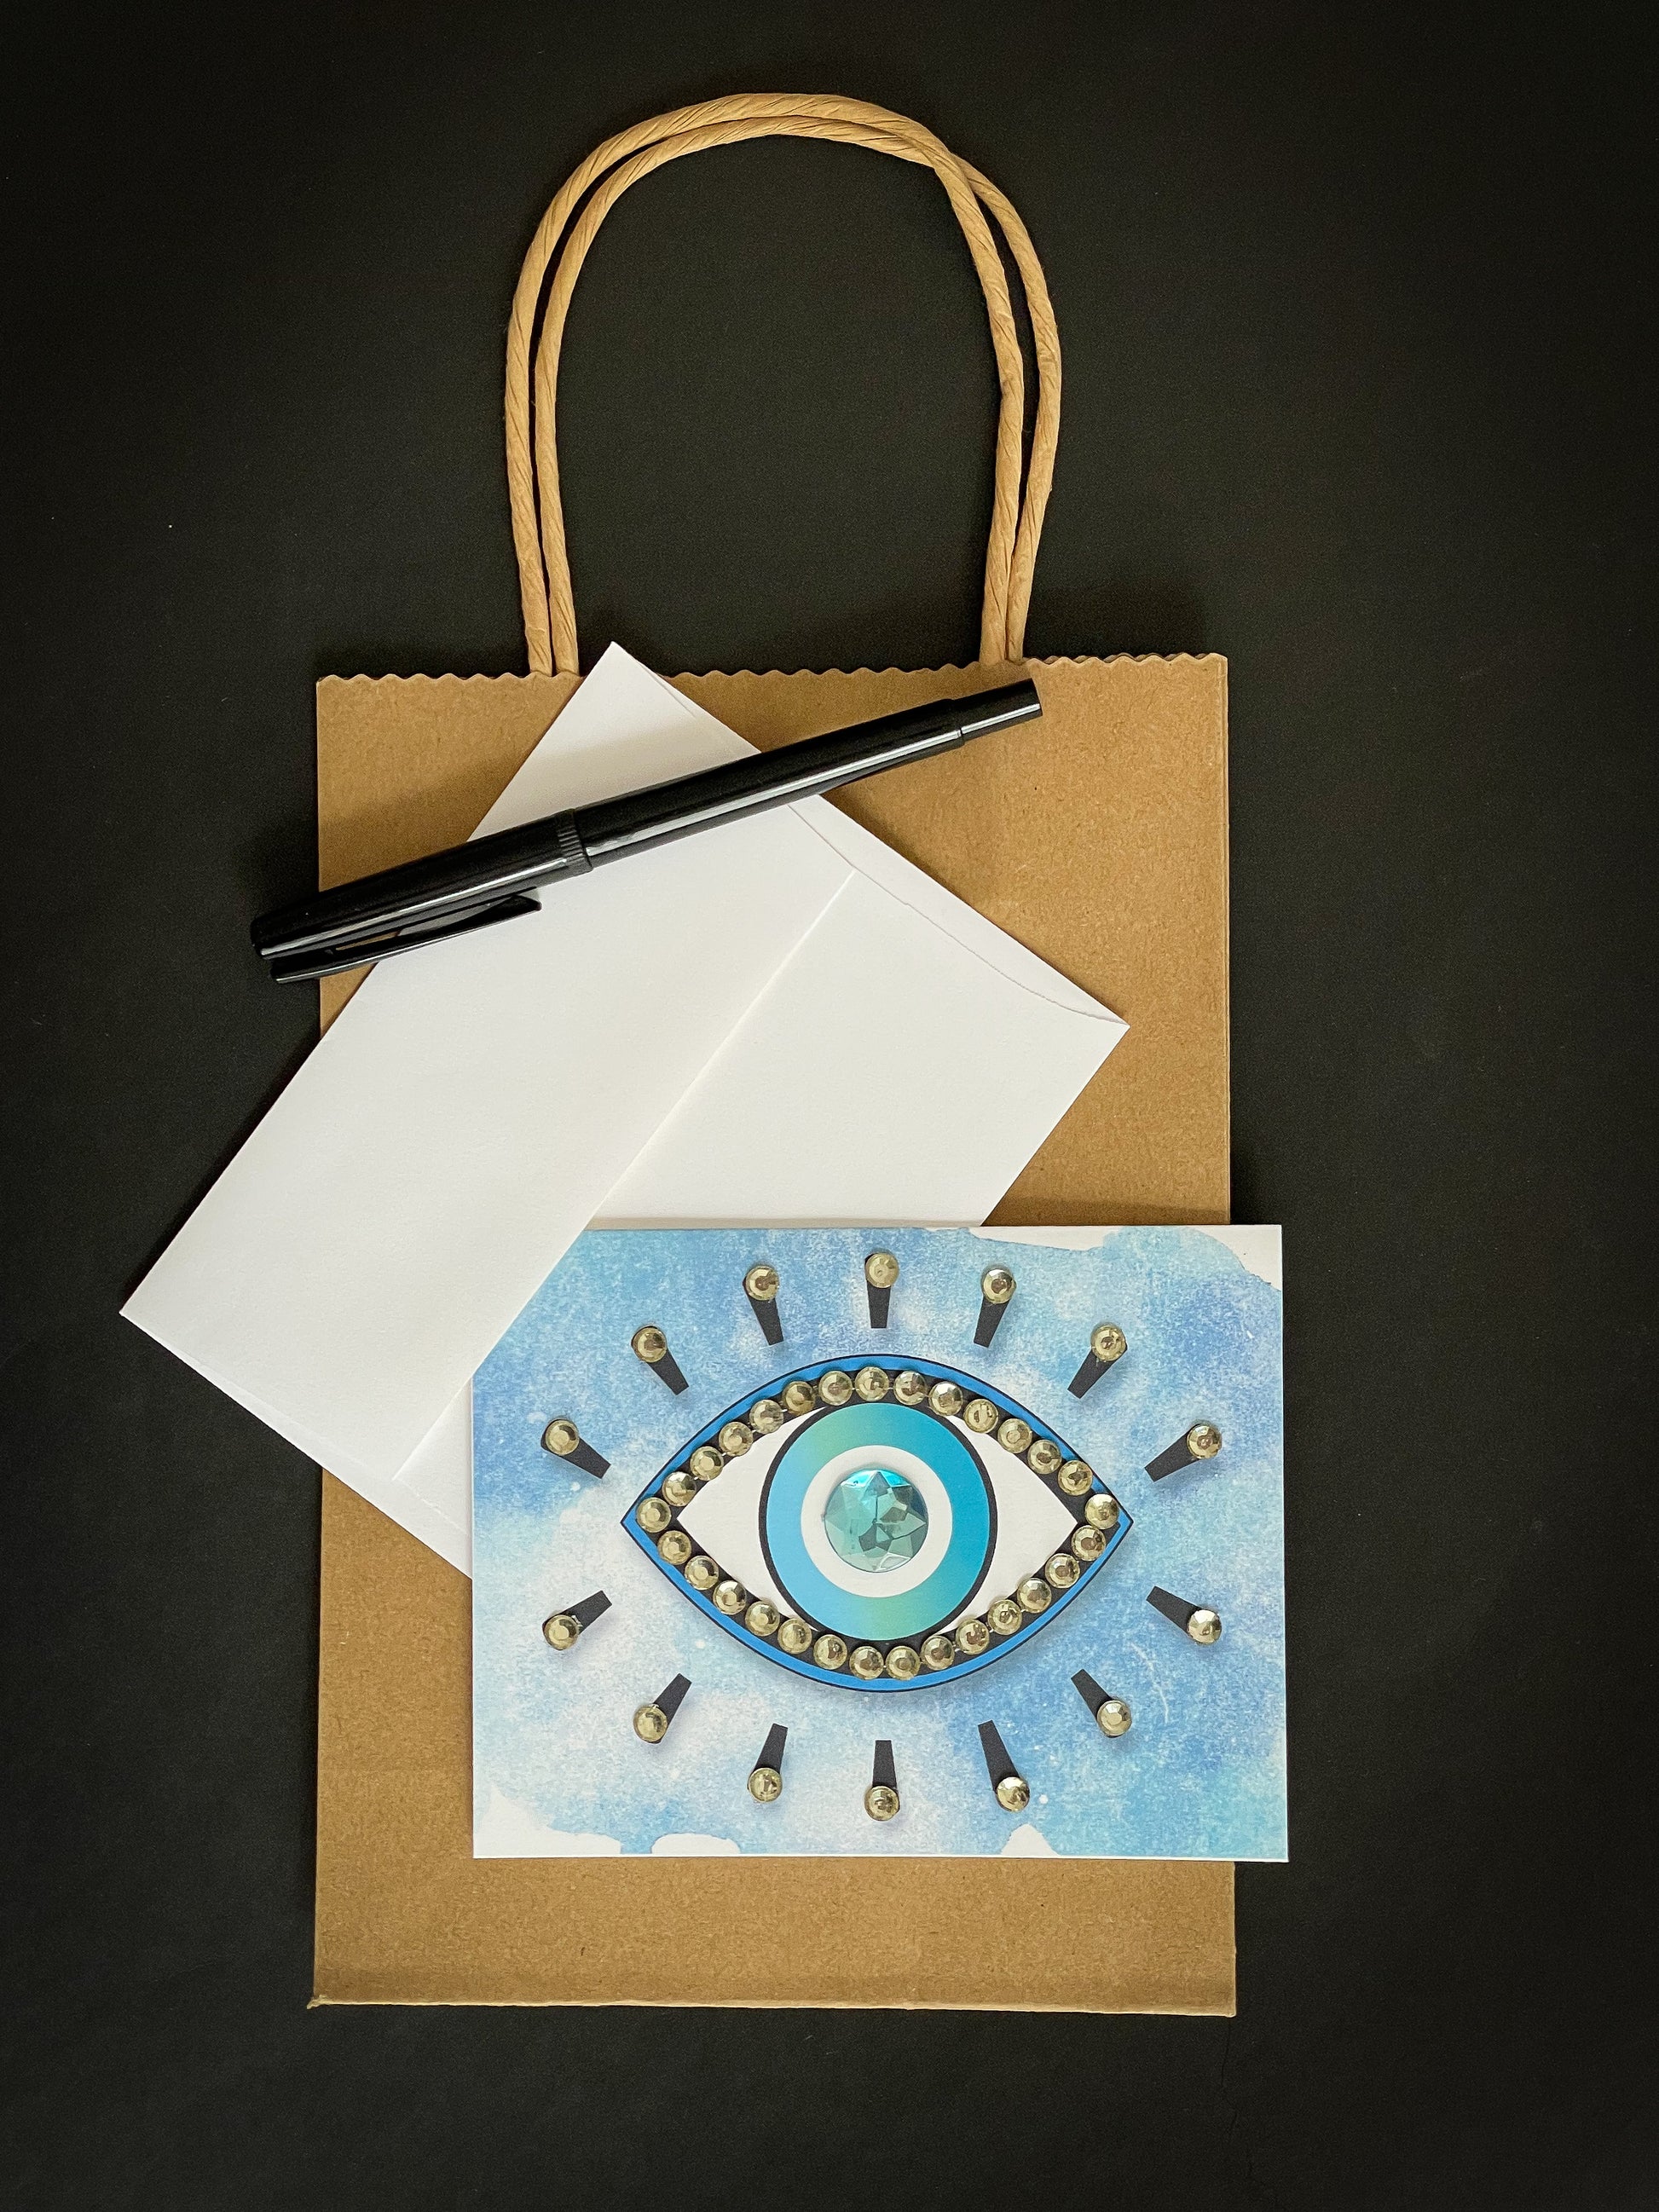 this is a note card on a craft paper gift bag with a white envelope and a black marker , the card has an evil eye symbol on a blue background